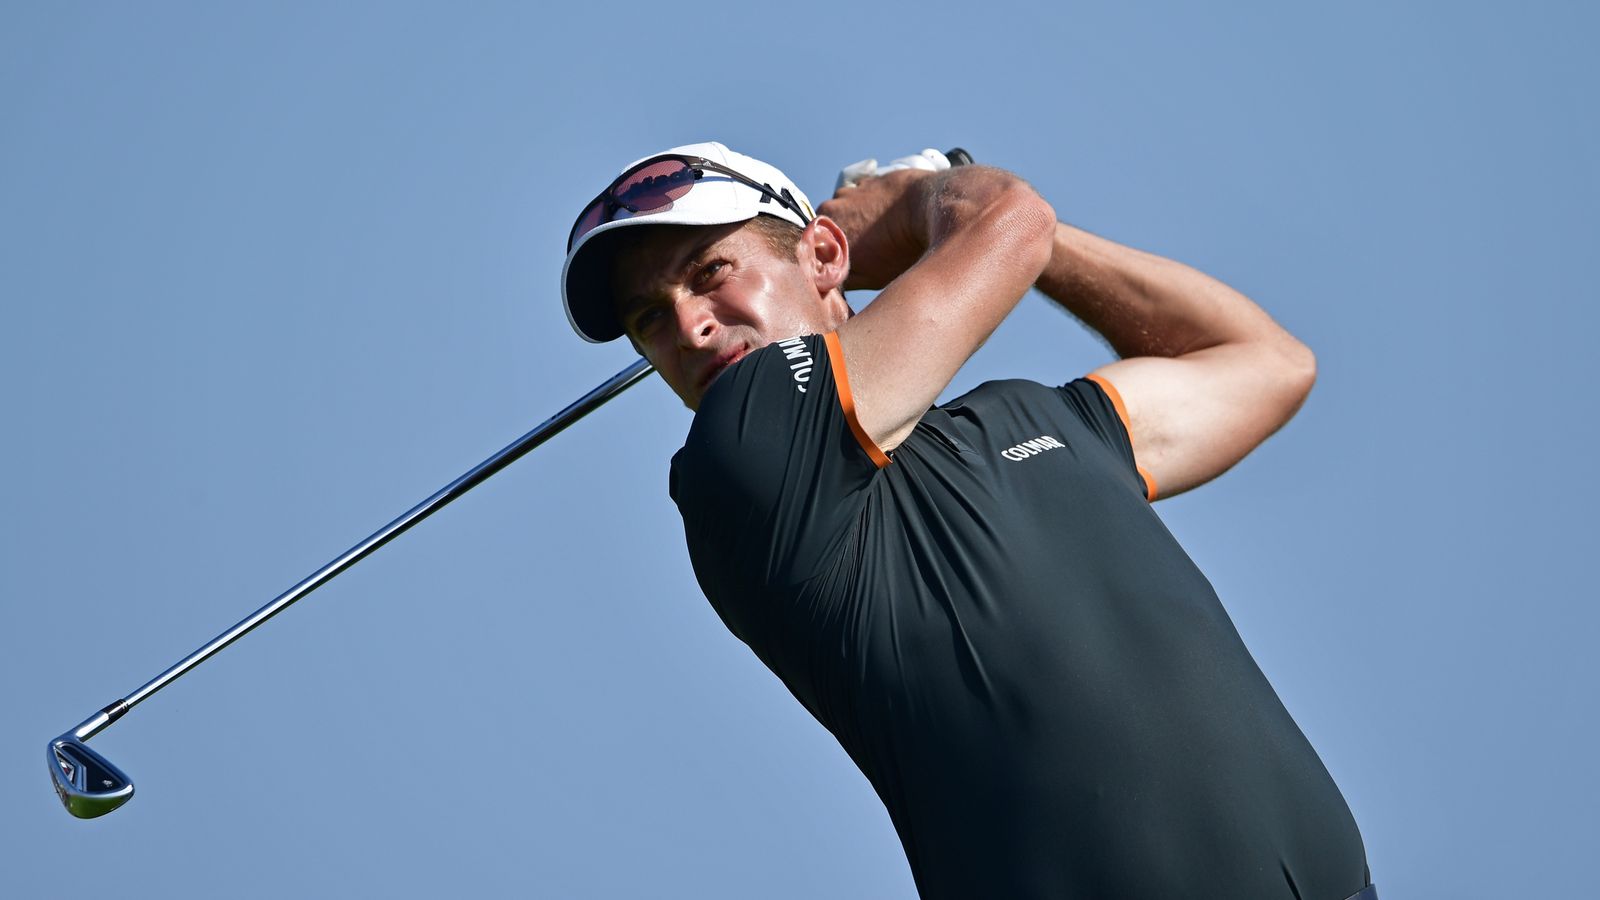 Lorenzo Gagli narrowly misses out on ace at Rocco Forte Open | Golf ...